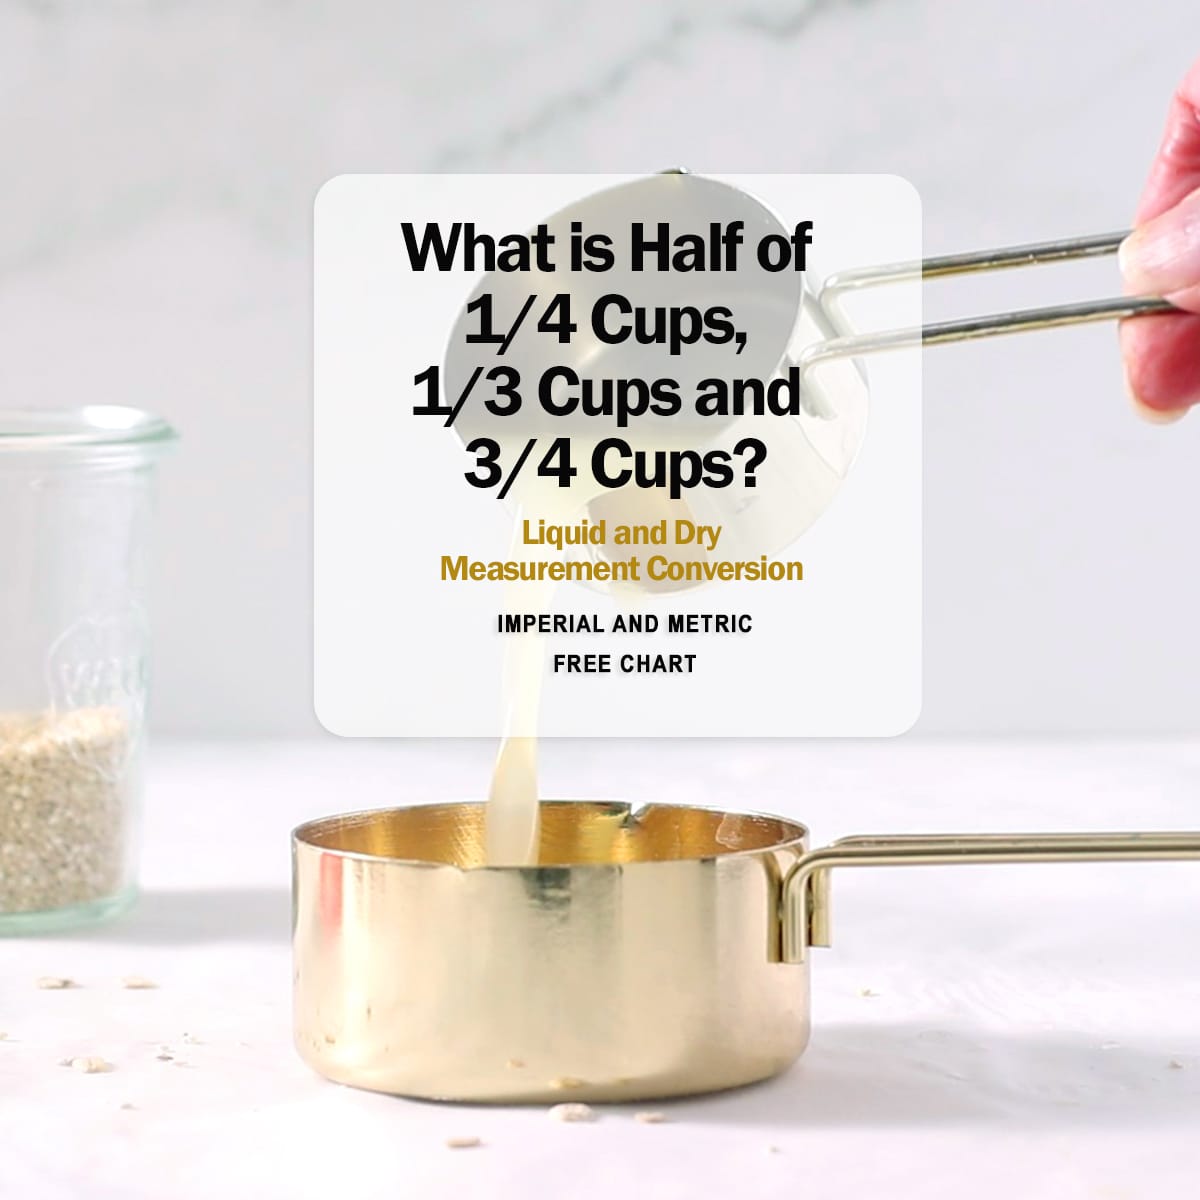 What is Half of 1/4 Cups, 1/3 Cups and 3/4 Cups? (free chart)